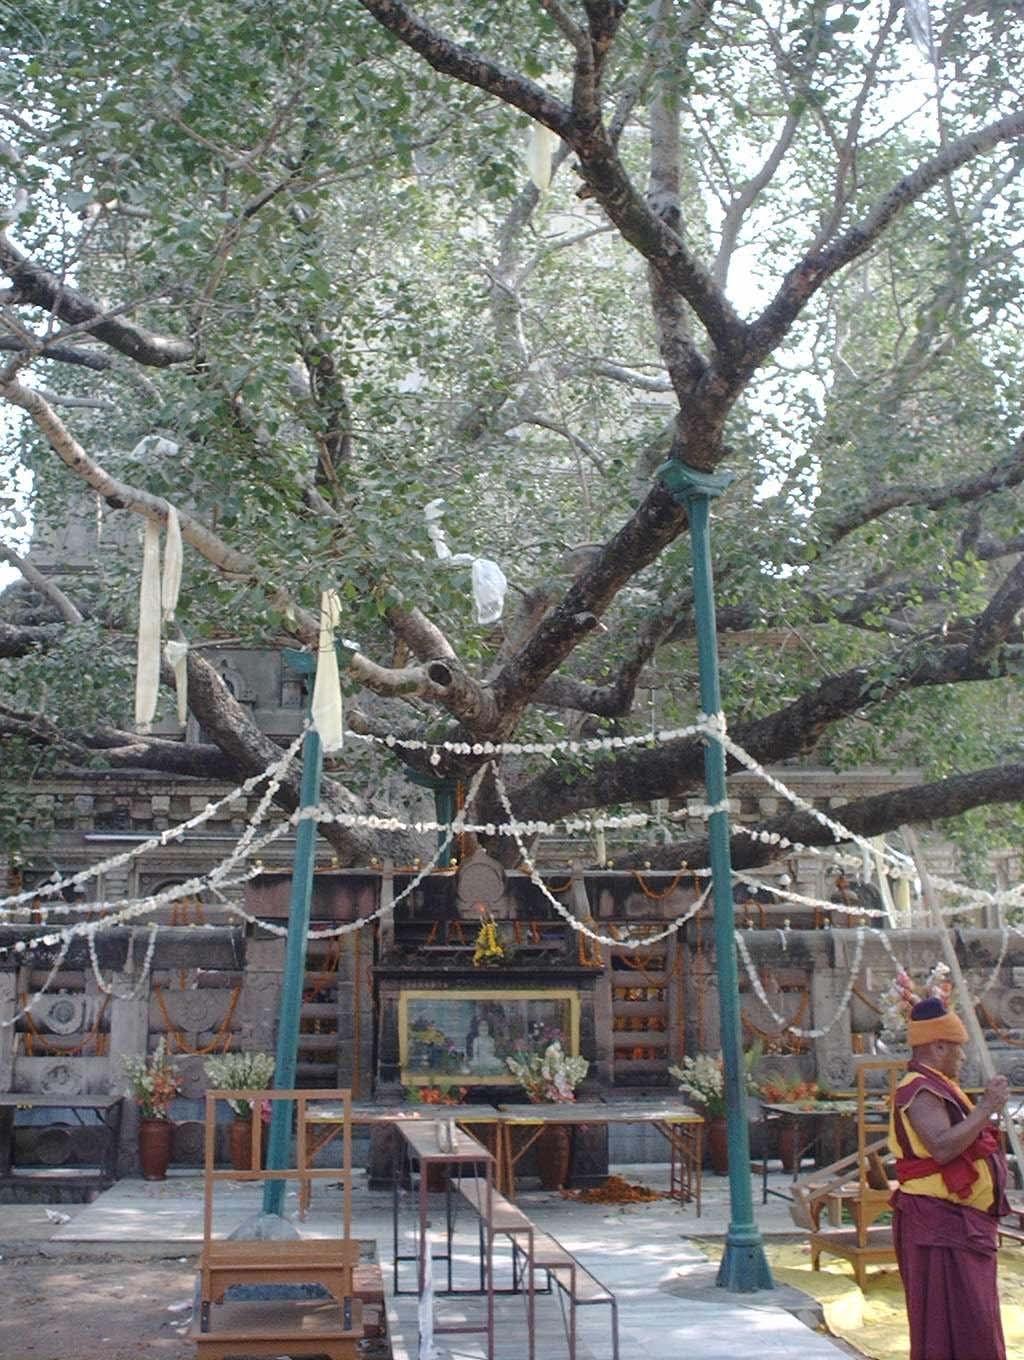 C. Supreme Enlightenment Bodhi tree at Bodh Gaya: A branch of the original pippala tree was planted in Sri Lanka by a delegation of the Emperor Asoka; when